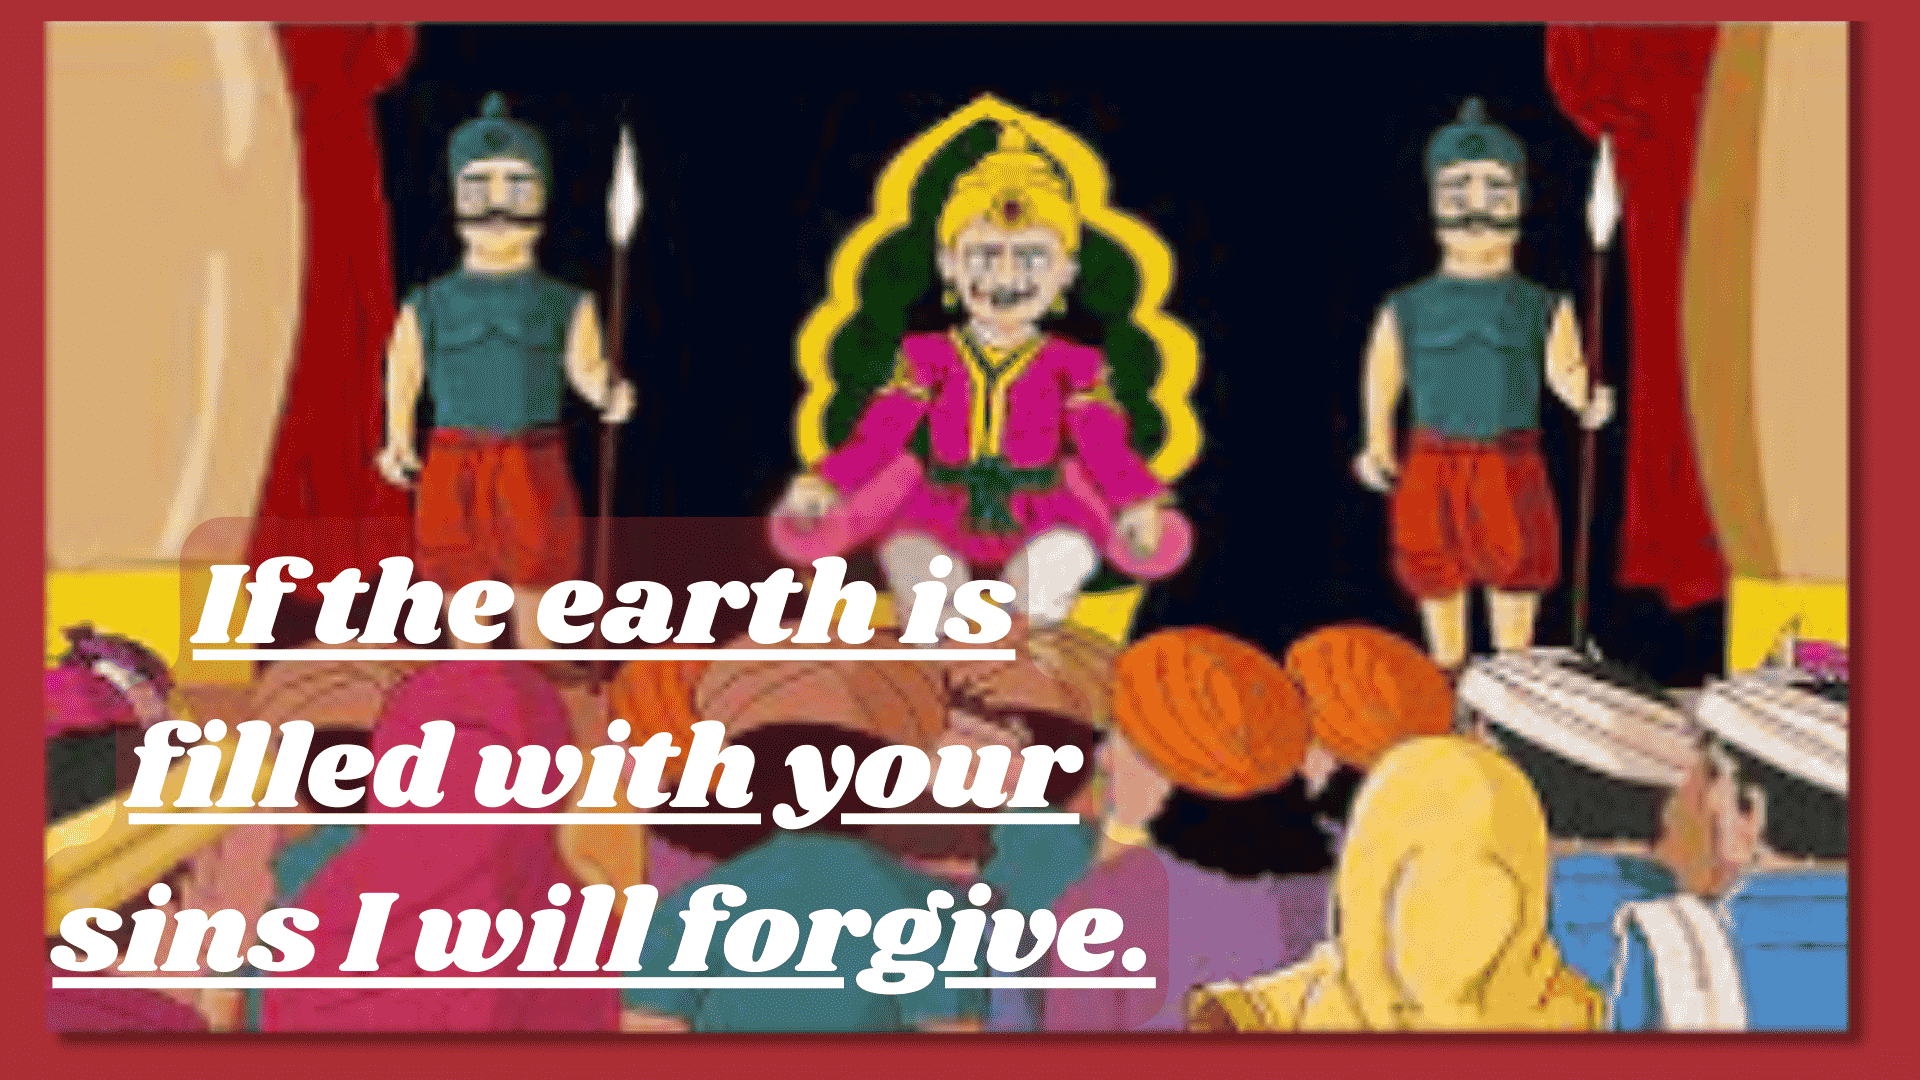 If the earth is filled with your sins I will forgive.